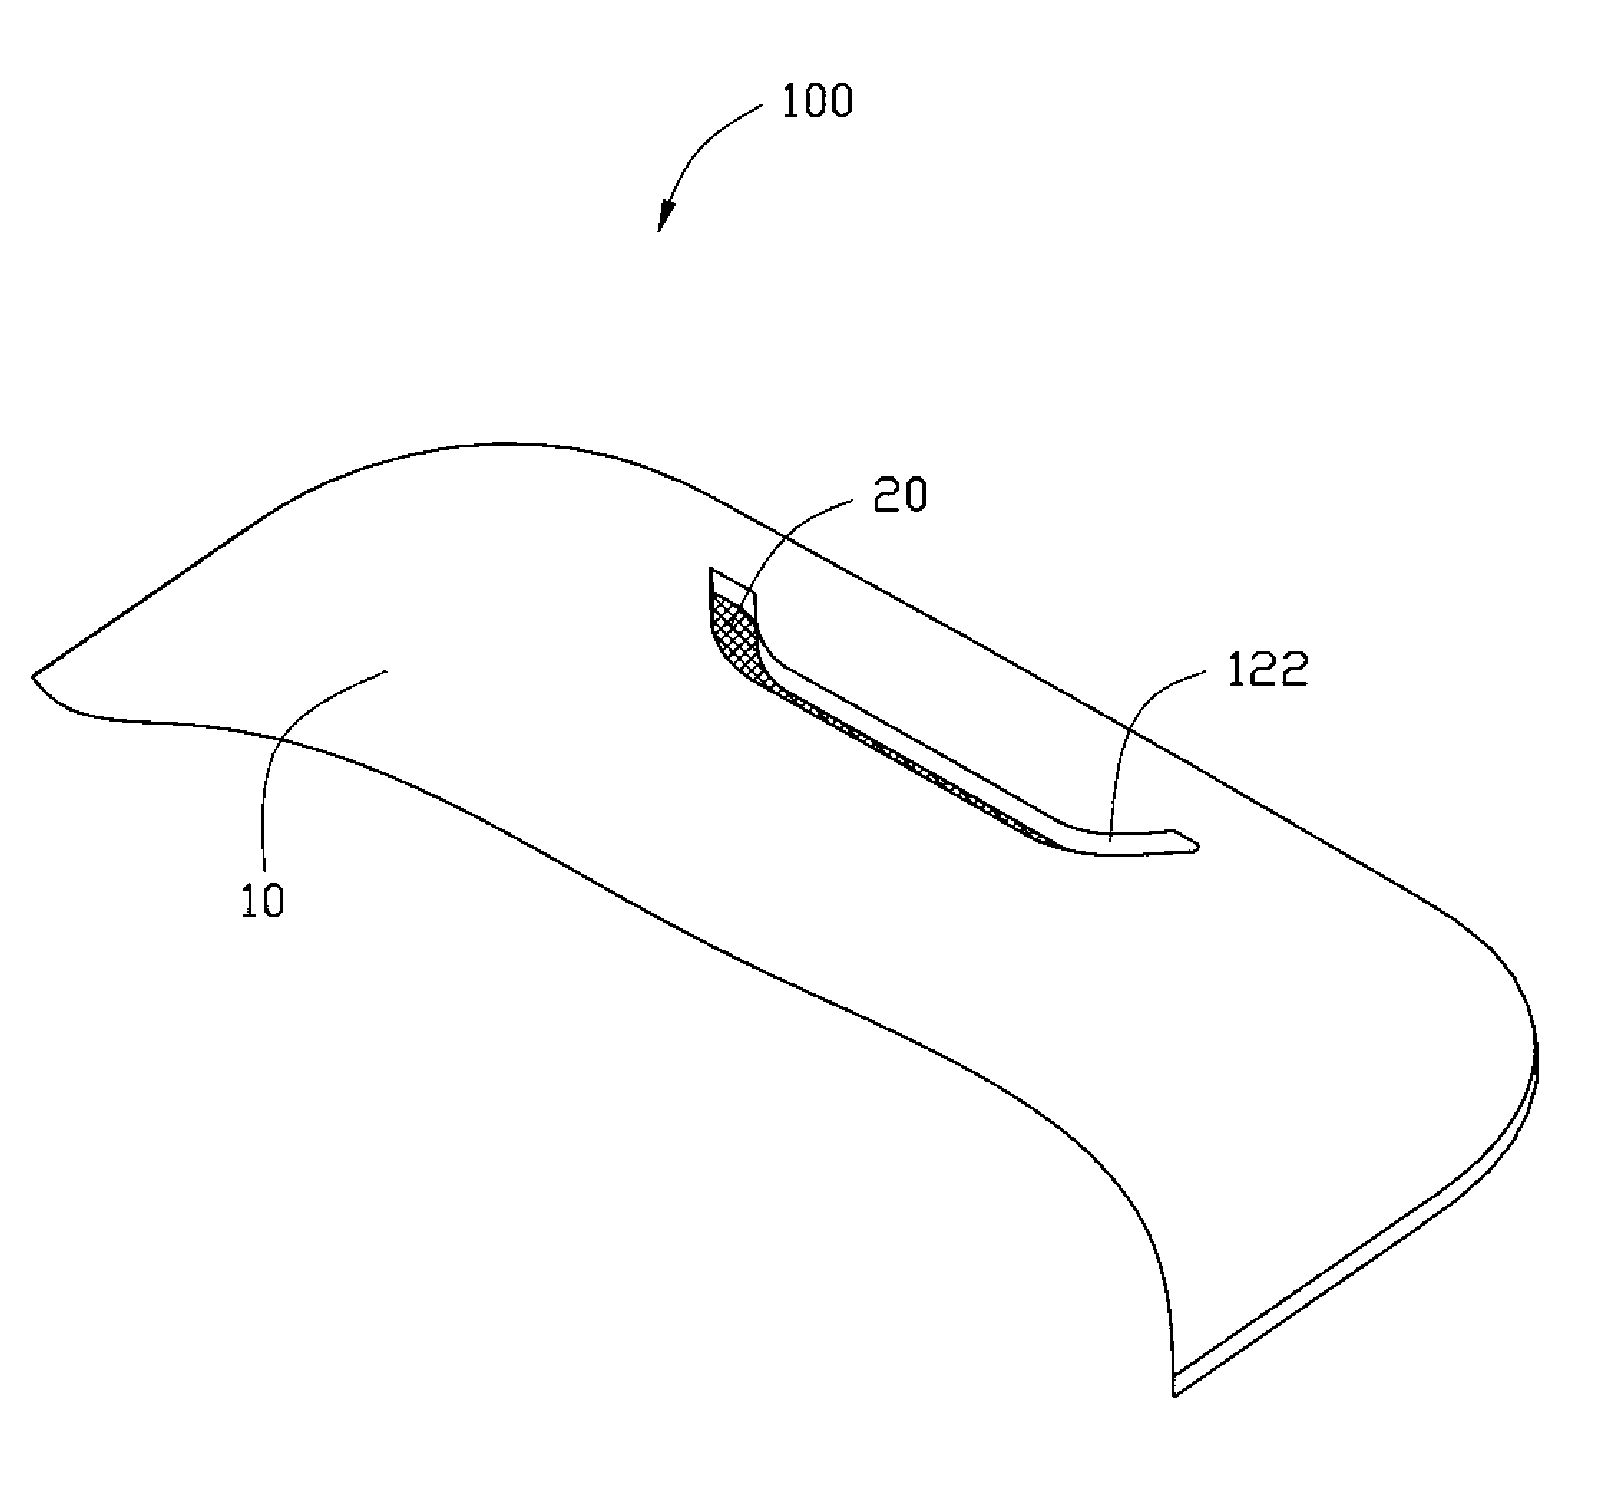 Telephone receiver structure of electronic device